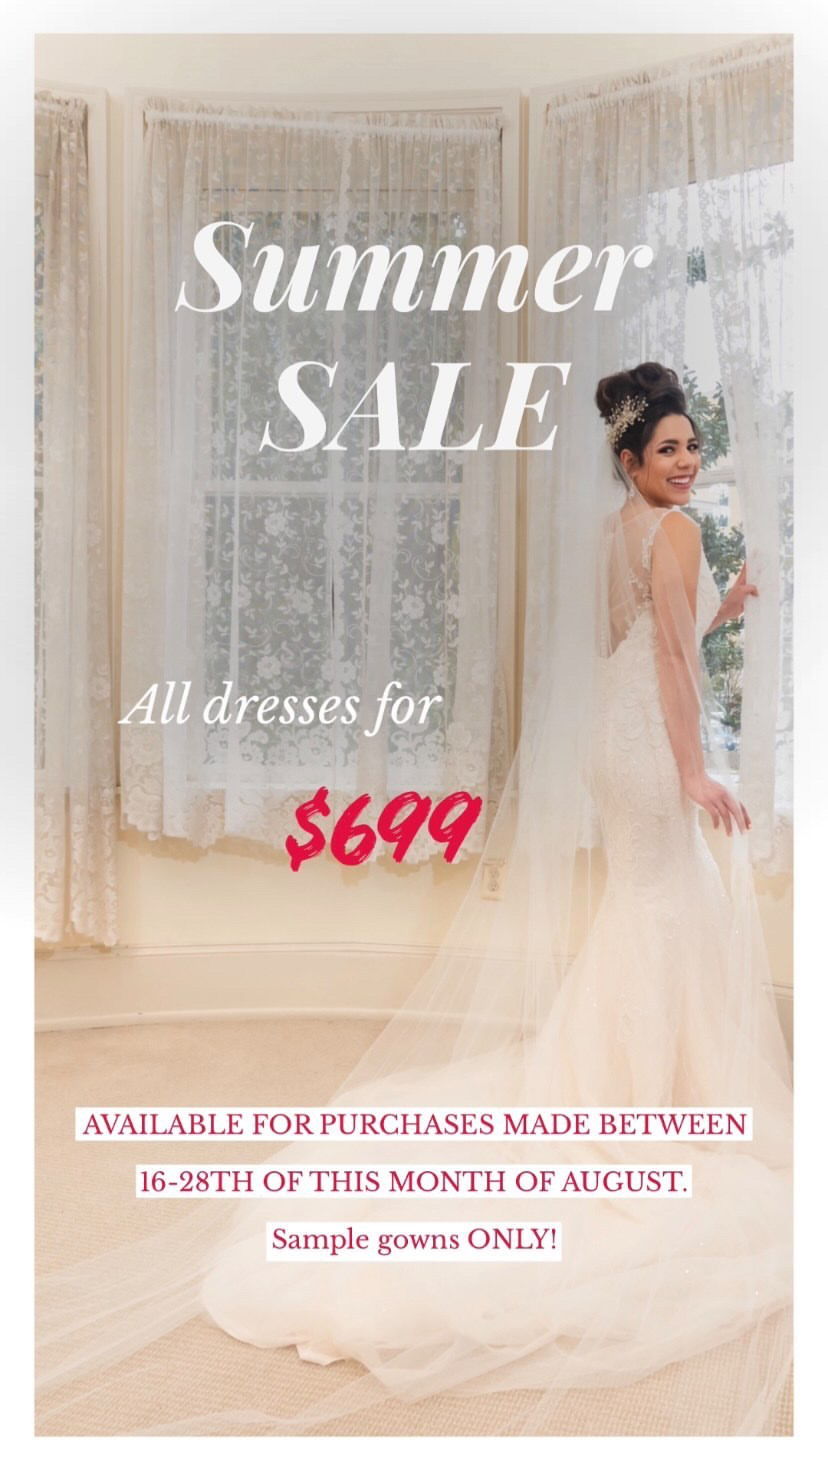 Image for post: Sample Gown Summer Sale - All Dresses $699